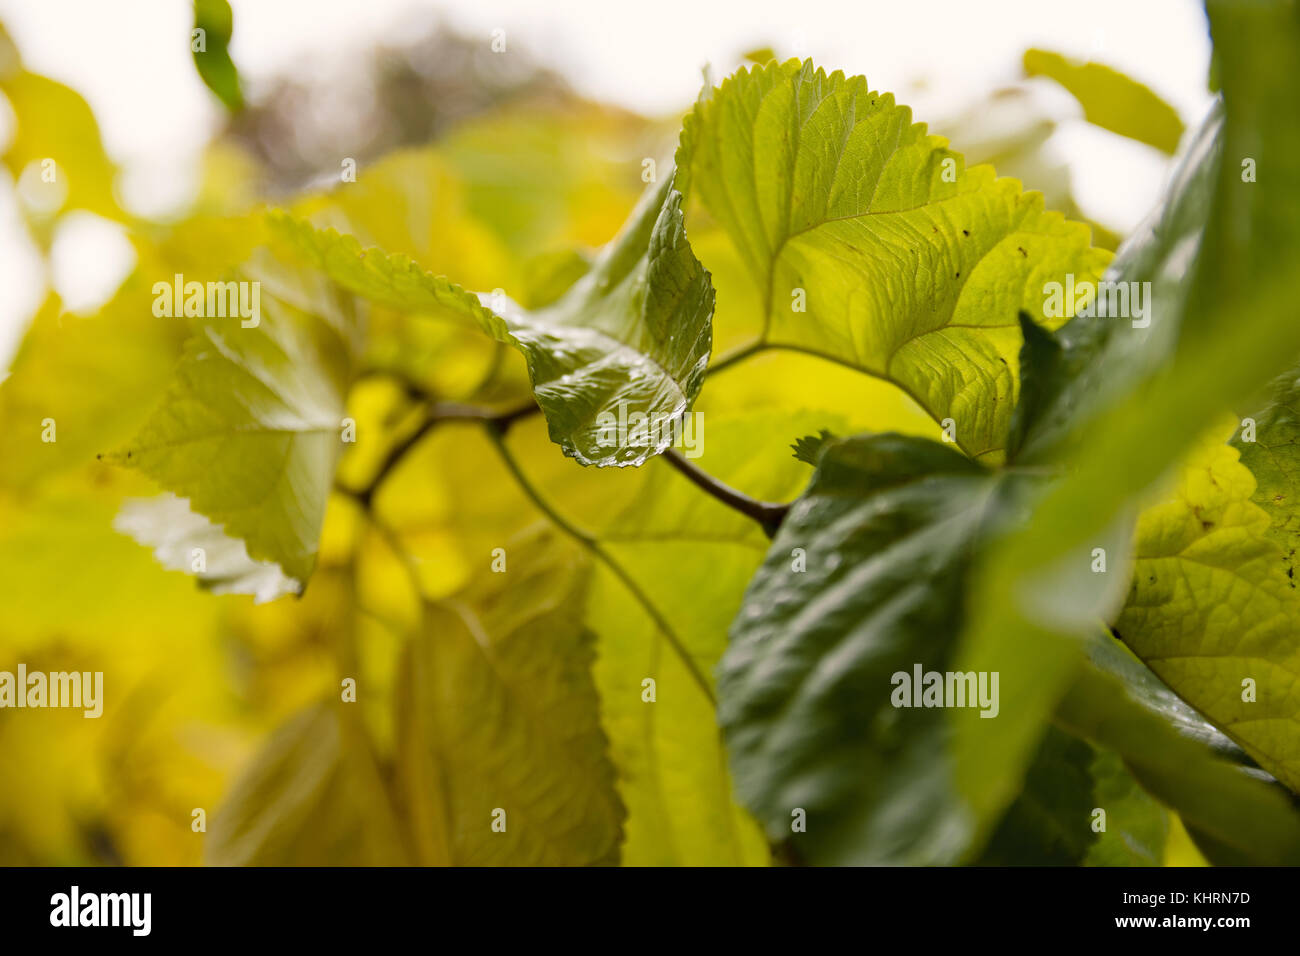 Close-Up Of Autumn Leaves Hanging From Branch Of Tree Stock Photo